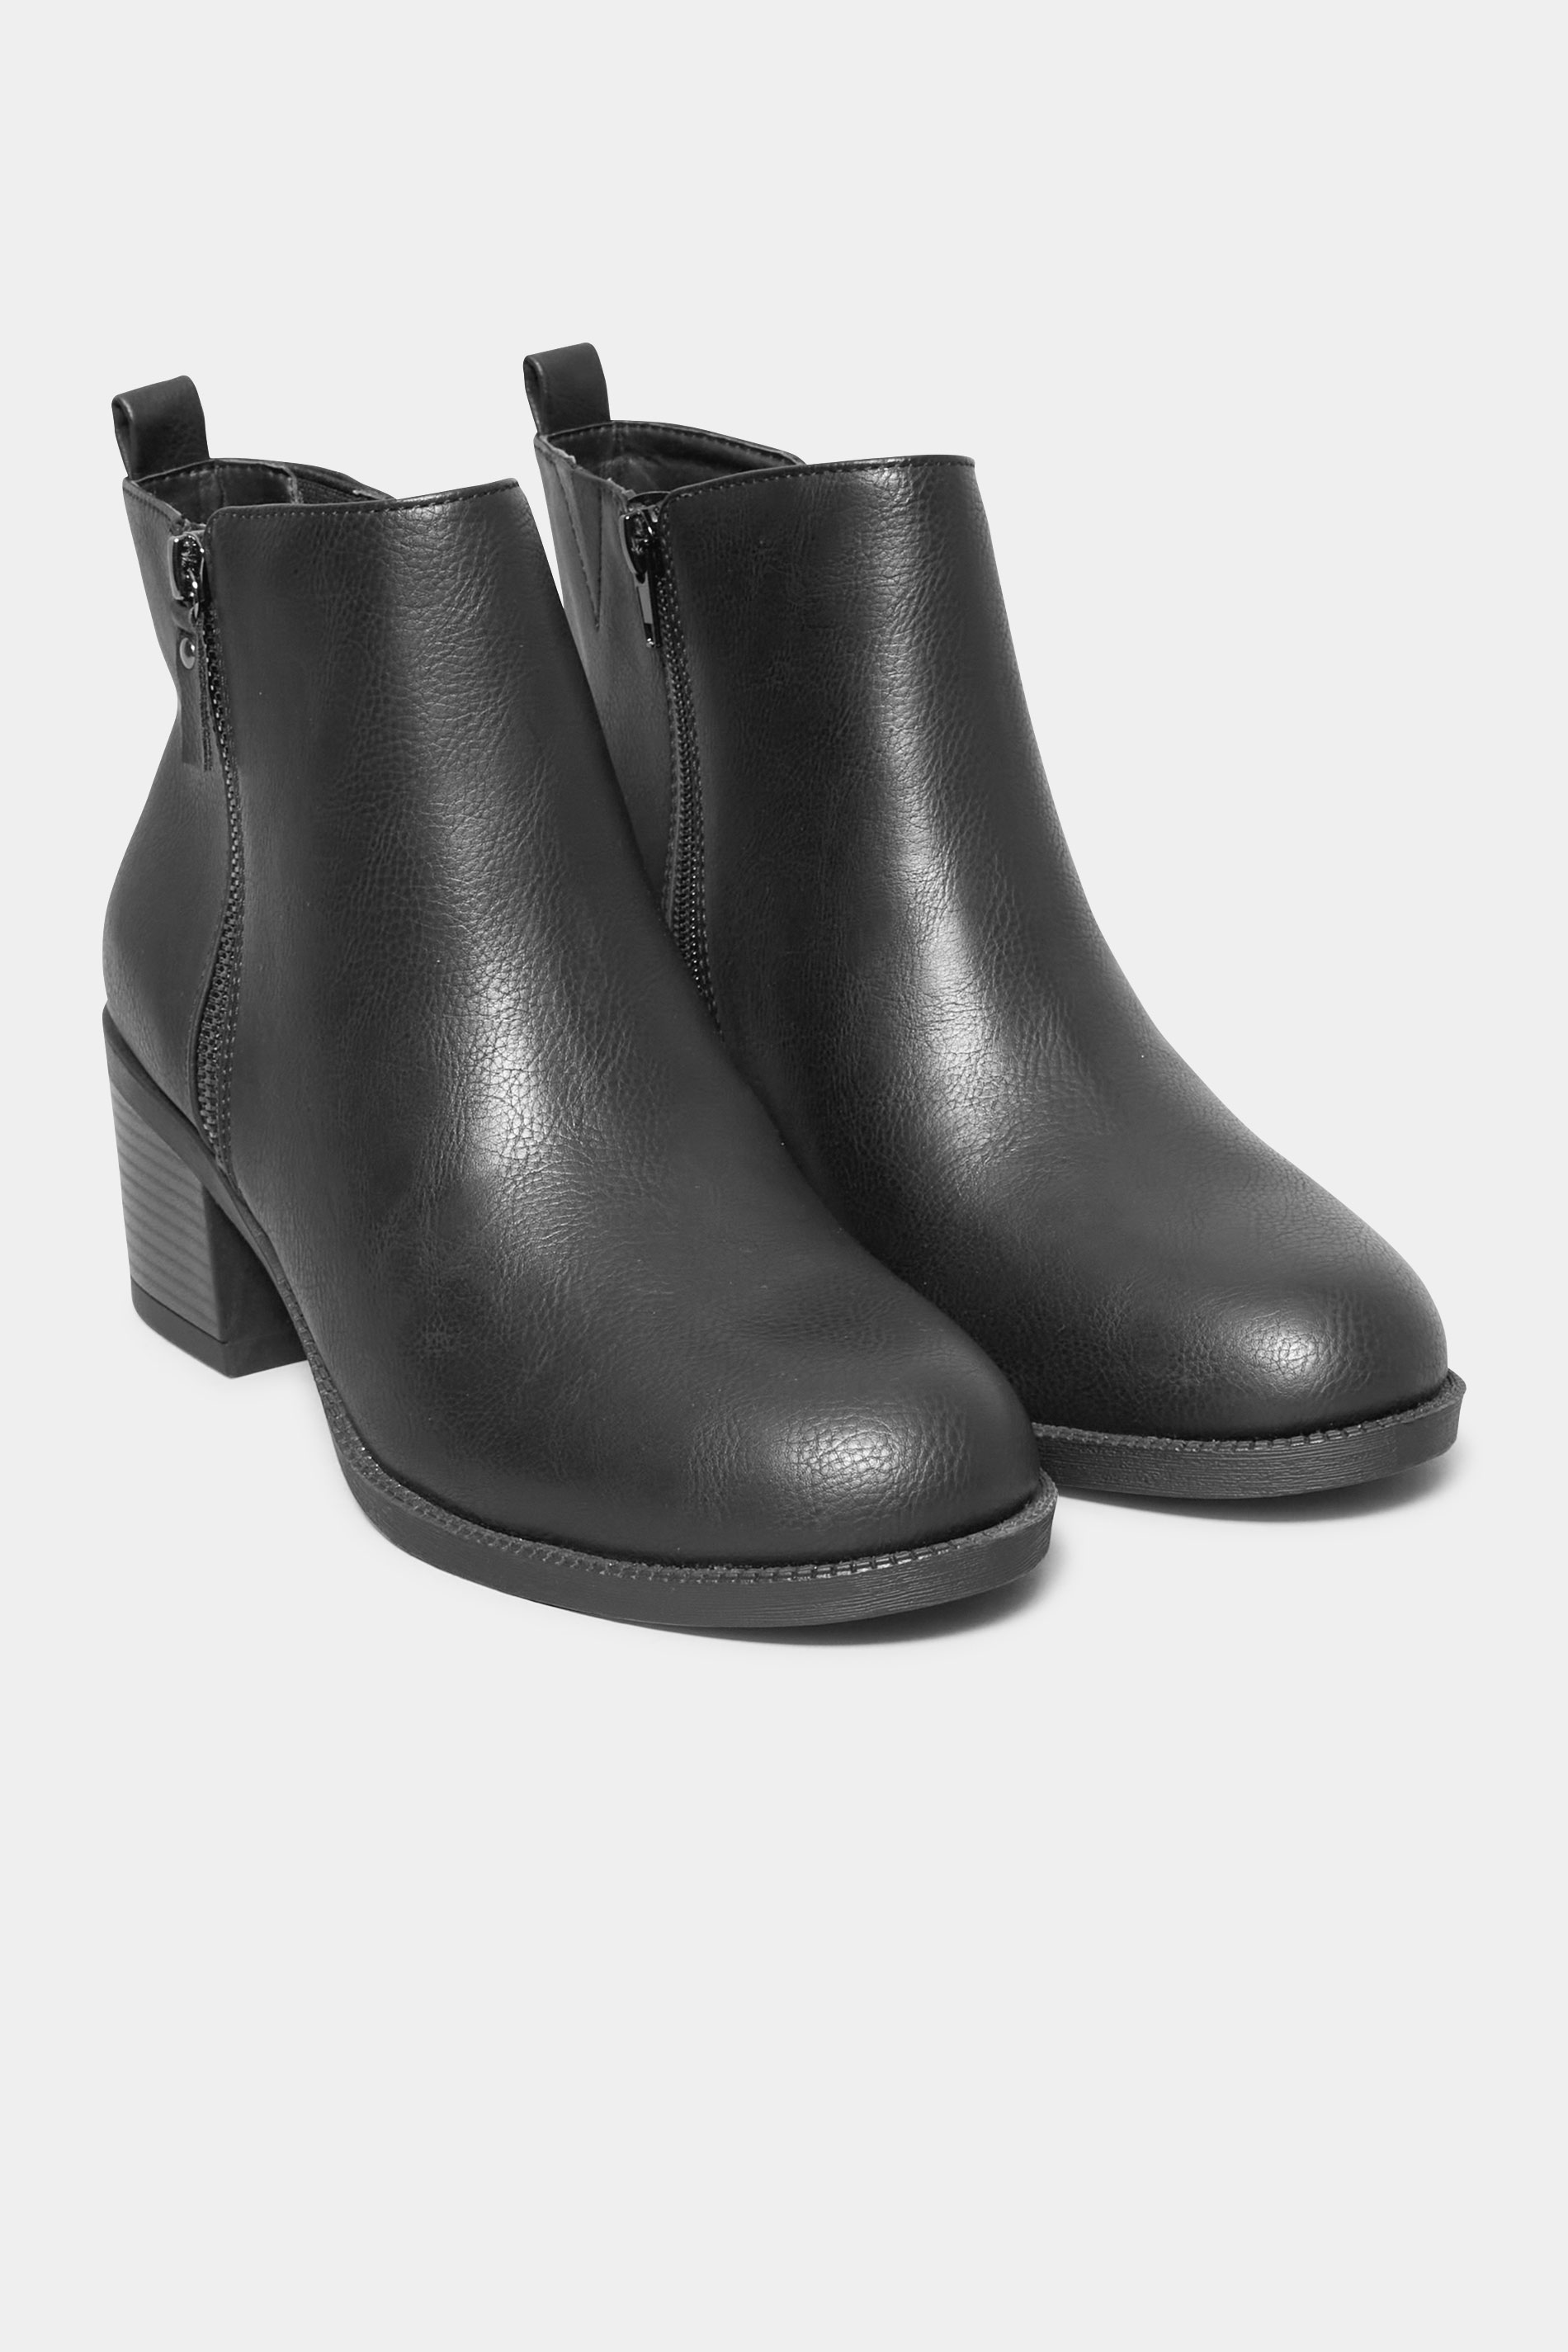 Black Block Heel Zip Boots In Wide E Fit & Wide Fit | Yours Clothing